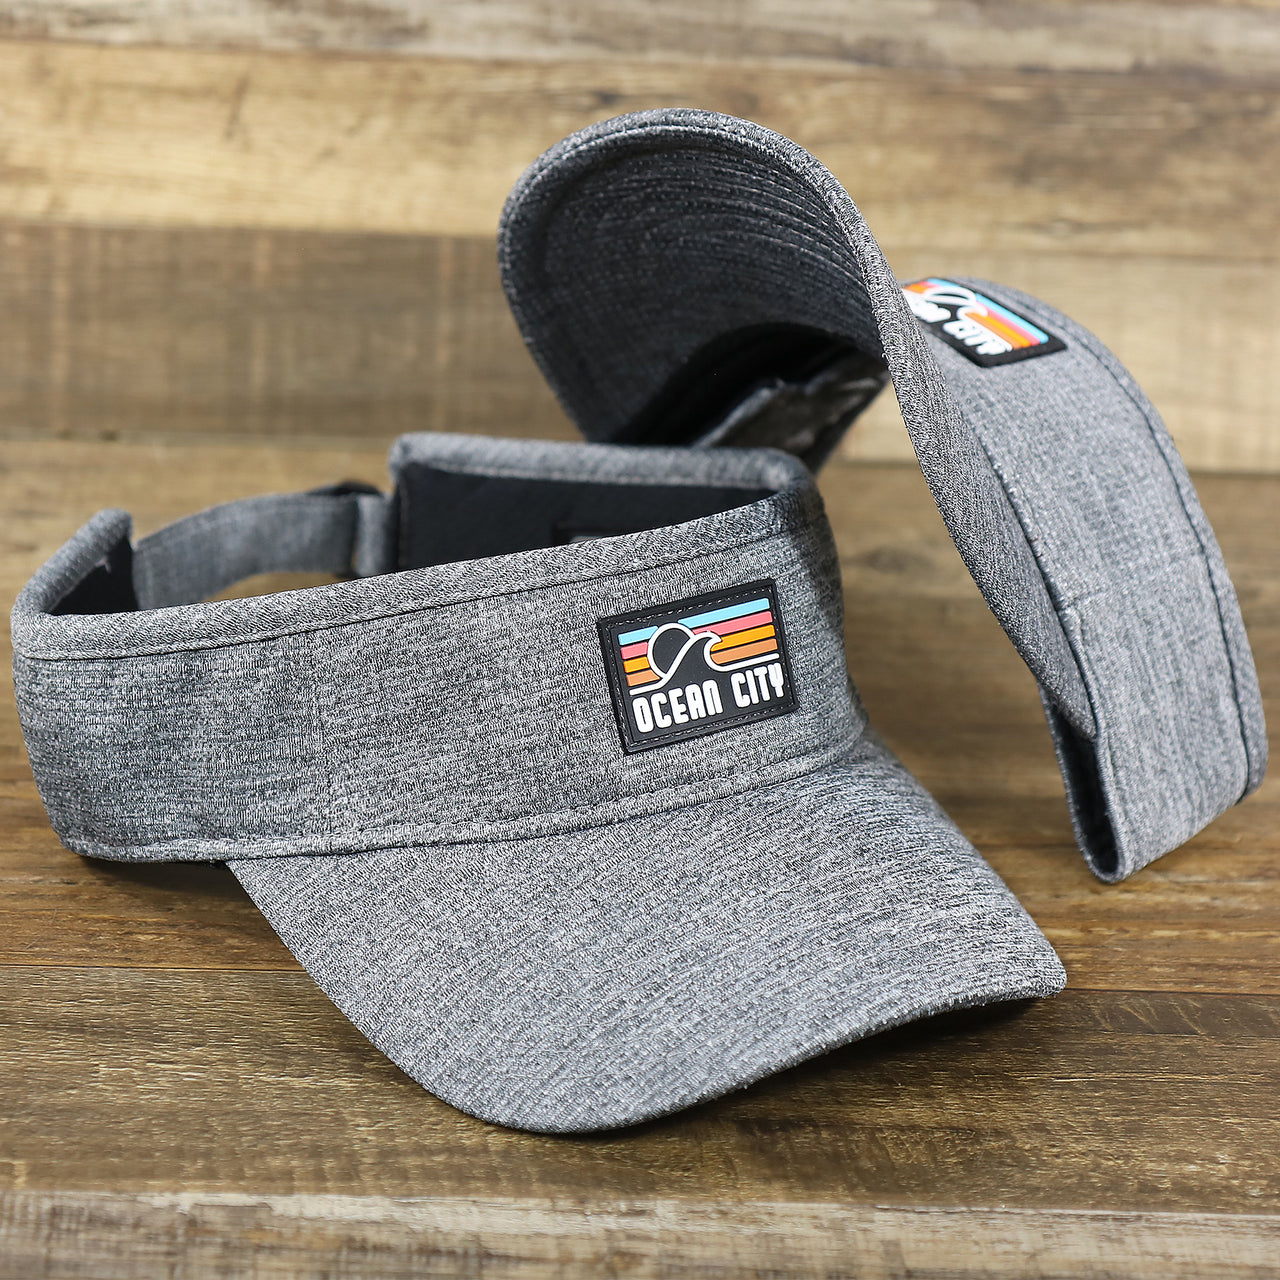 The New Jersey High Point PVC Ocean City Rubber Patch Cool Fit Adjustable Visor | Graphite Gray Visor